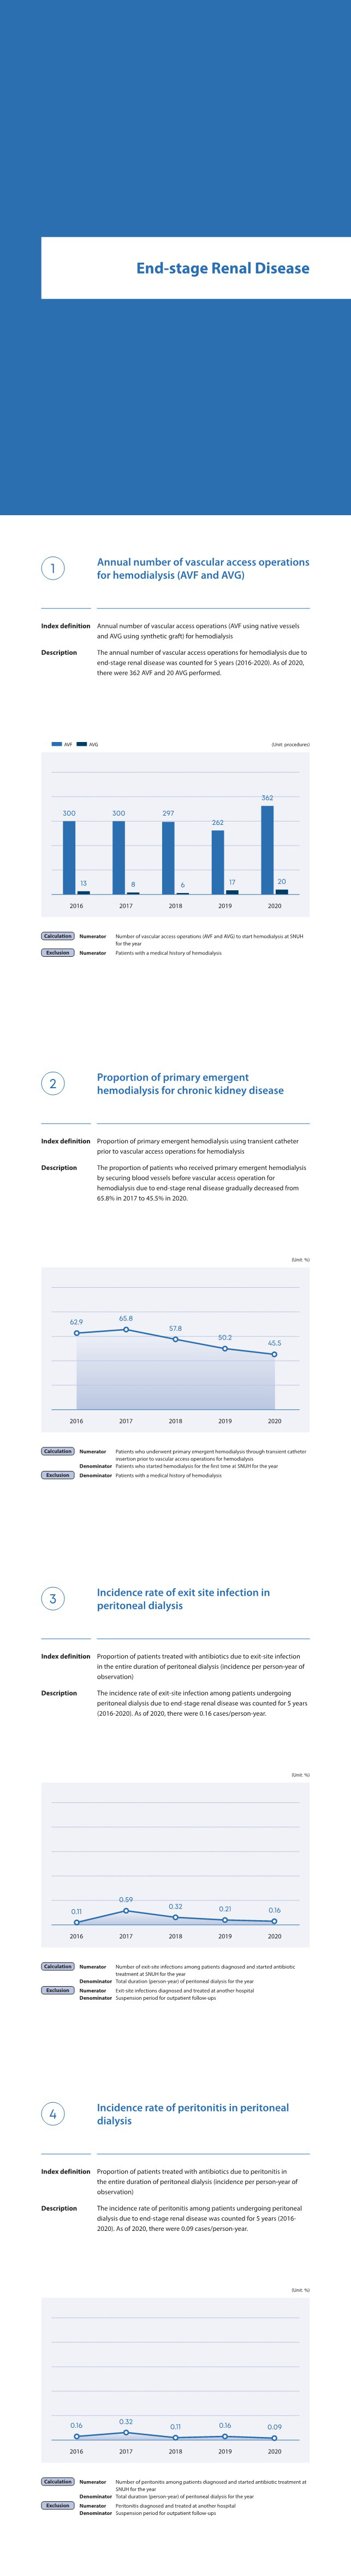 End-stage Renal Disease, Annual number of vascular access operations (AVF using native vessels and AVG using synthetic graft) for hemodialysis, The annual number of vascular access operations for hemodialysis due to end-stage renal disease was counted for 5 years (2016-2020). As of 2020, there were 362 AVF and 20 AVG performed.